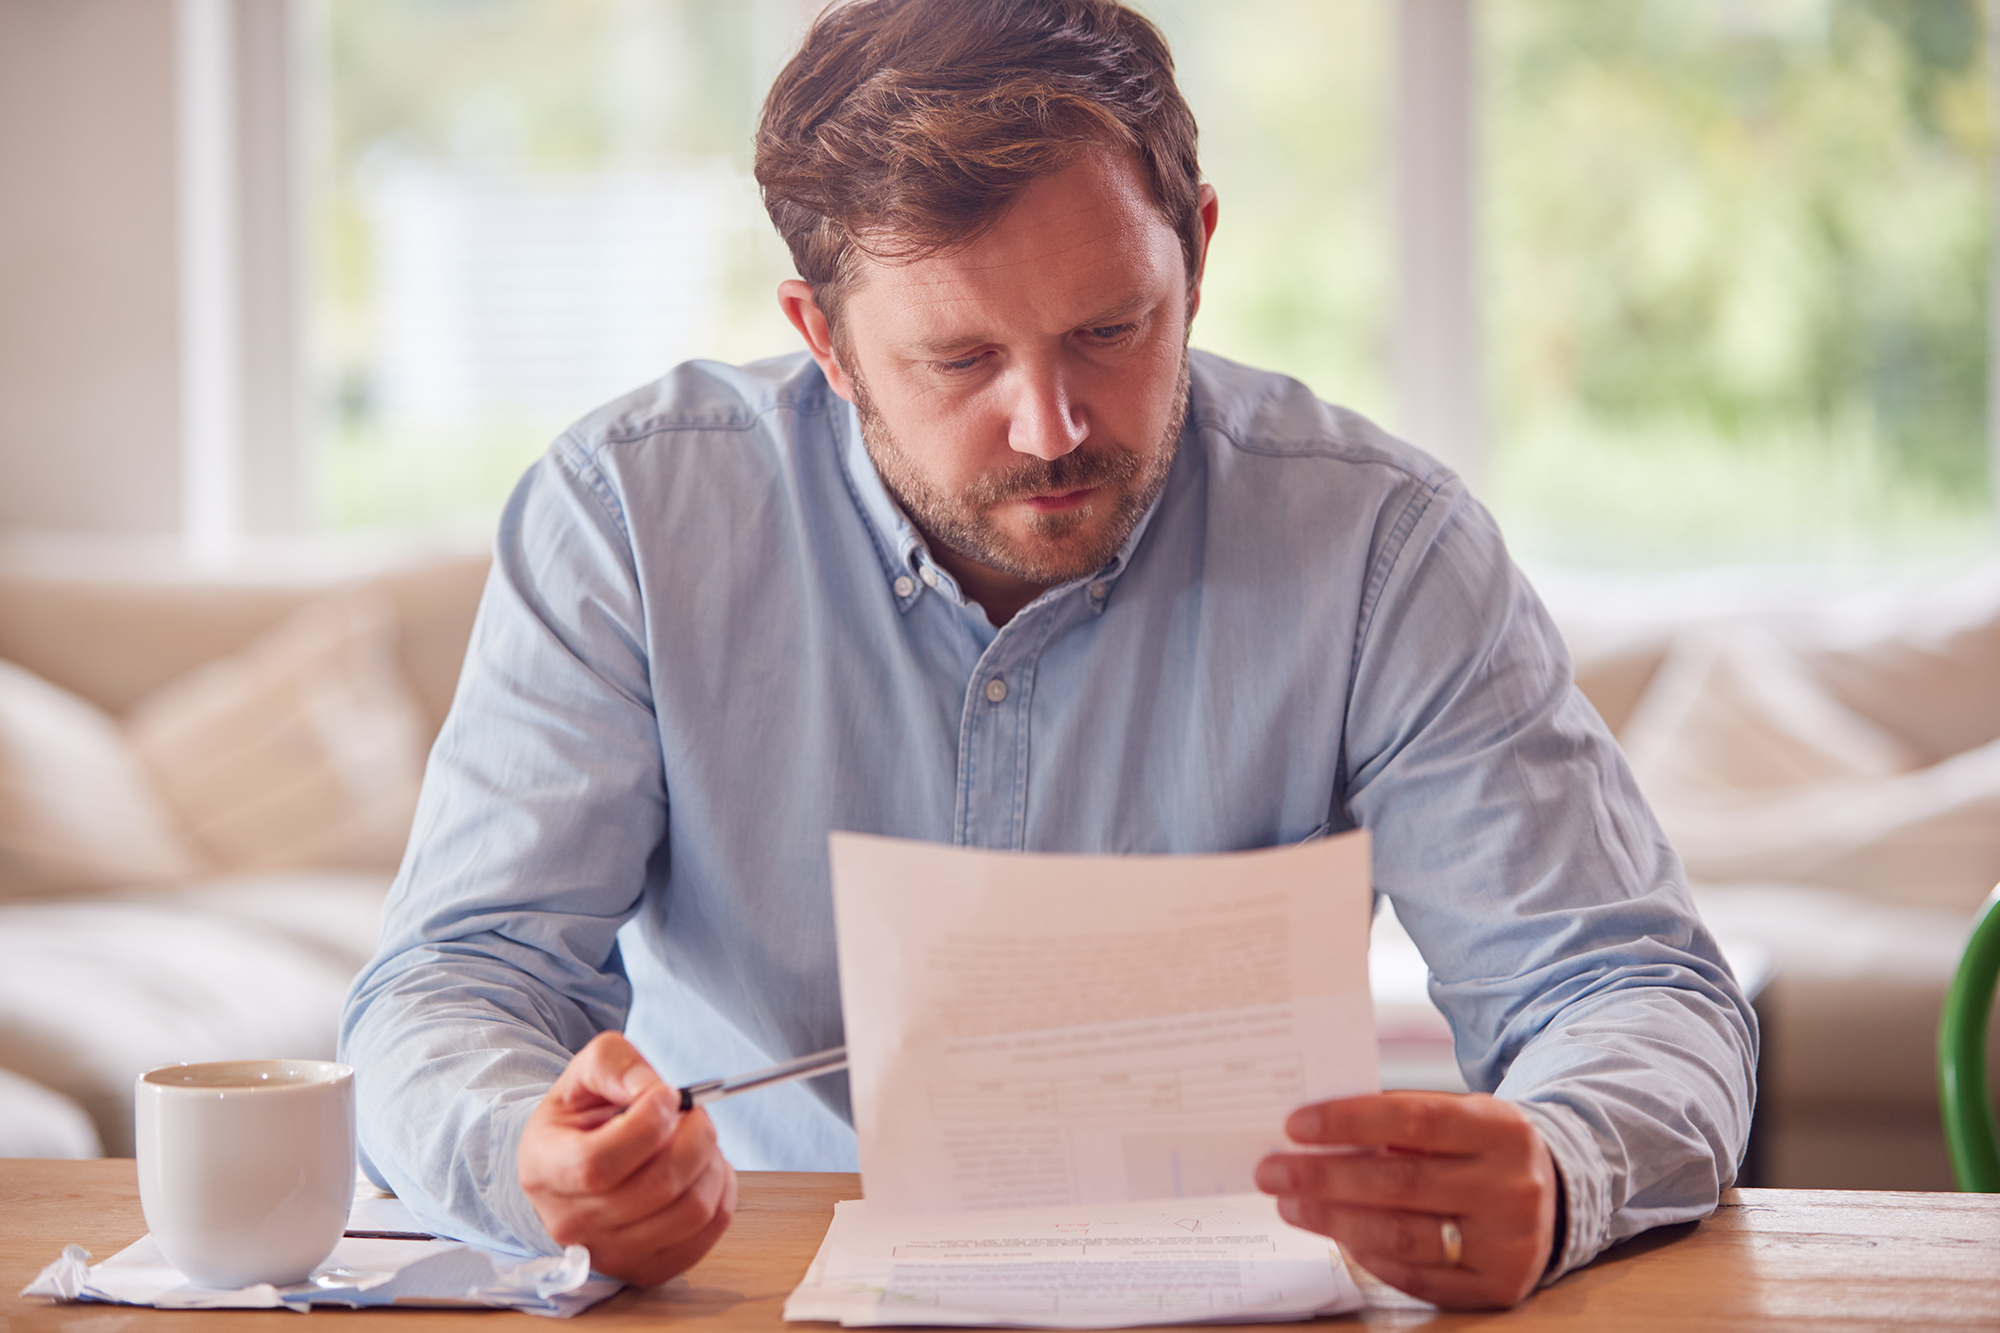 Man reading a document. (Image: Shutterstock)